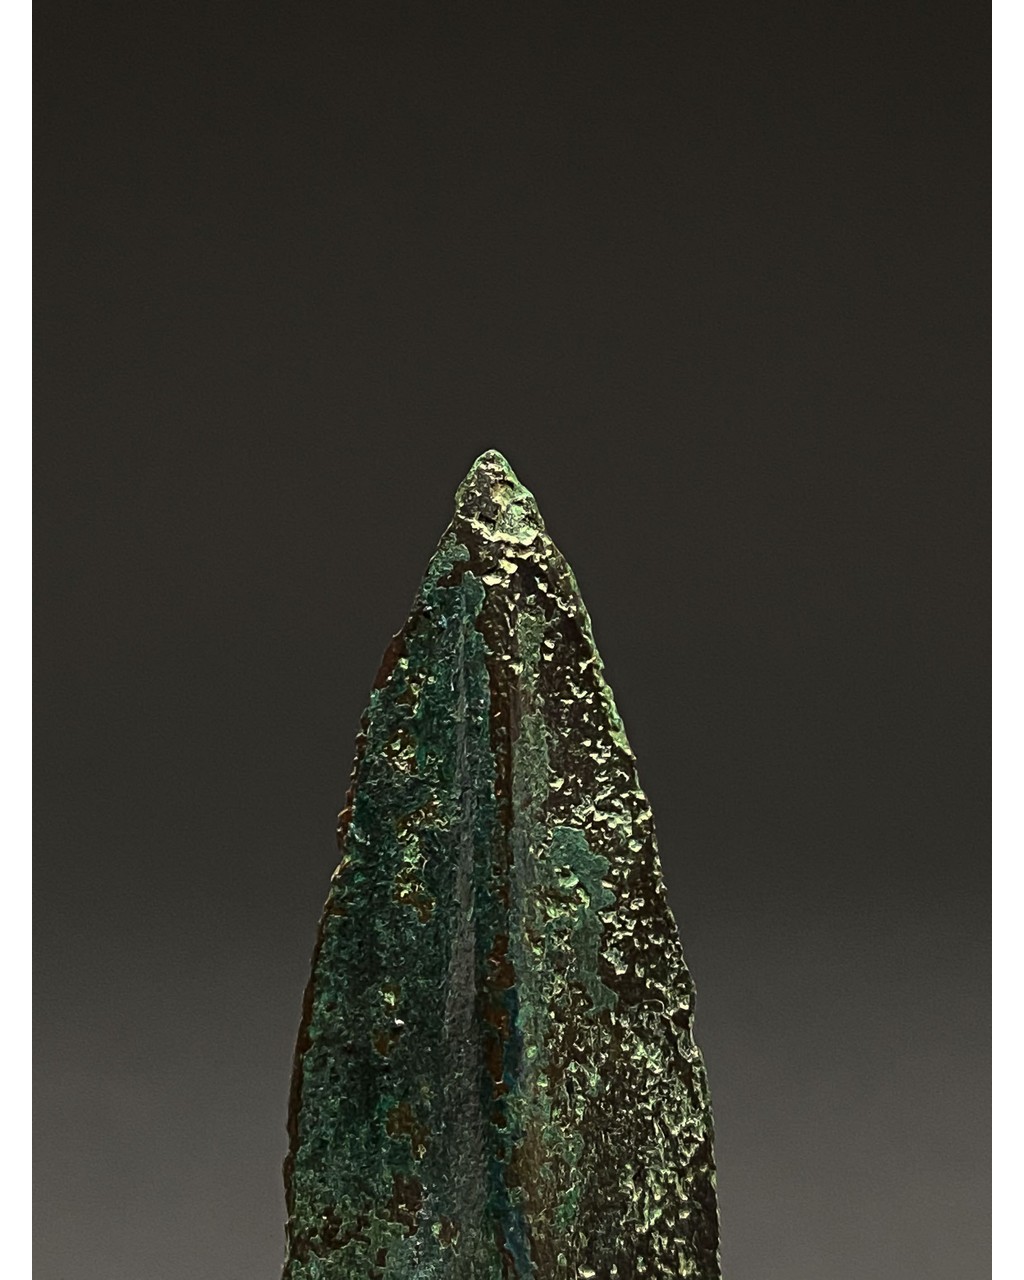 ANCIENT BRONZE SPEAR ON STAND - Image 2 of 3